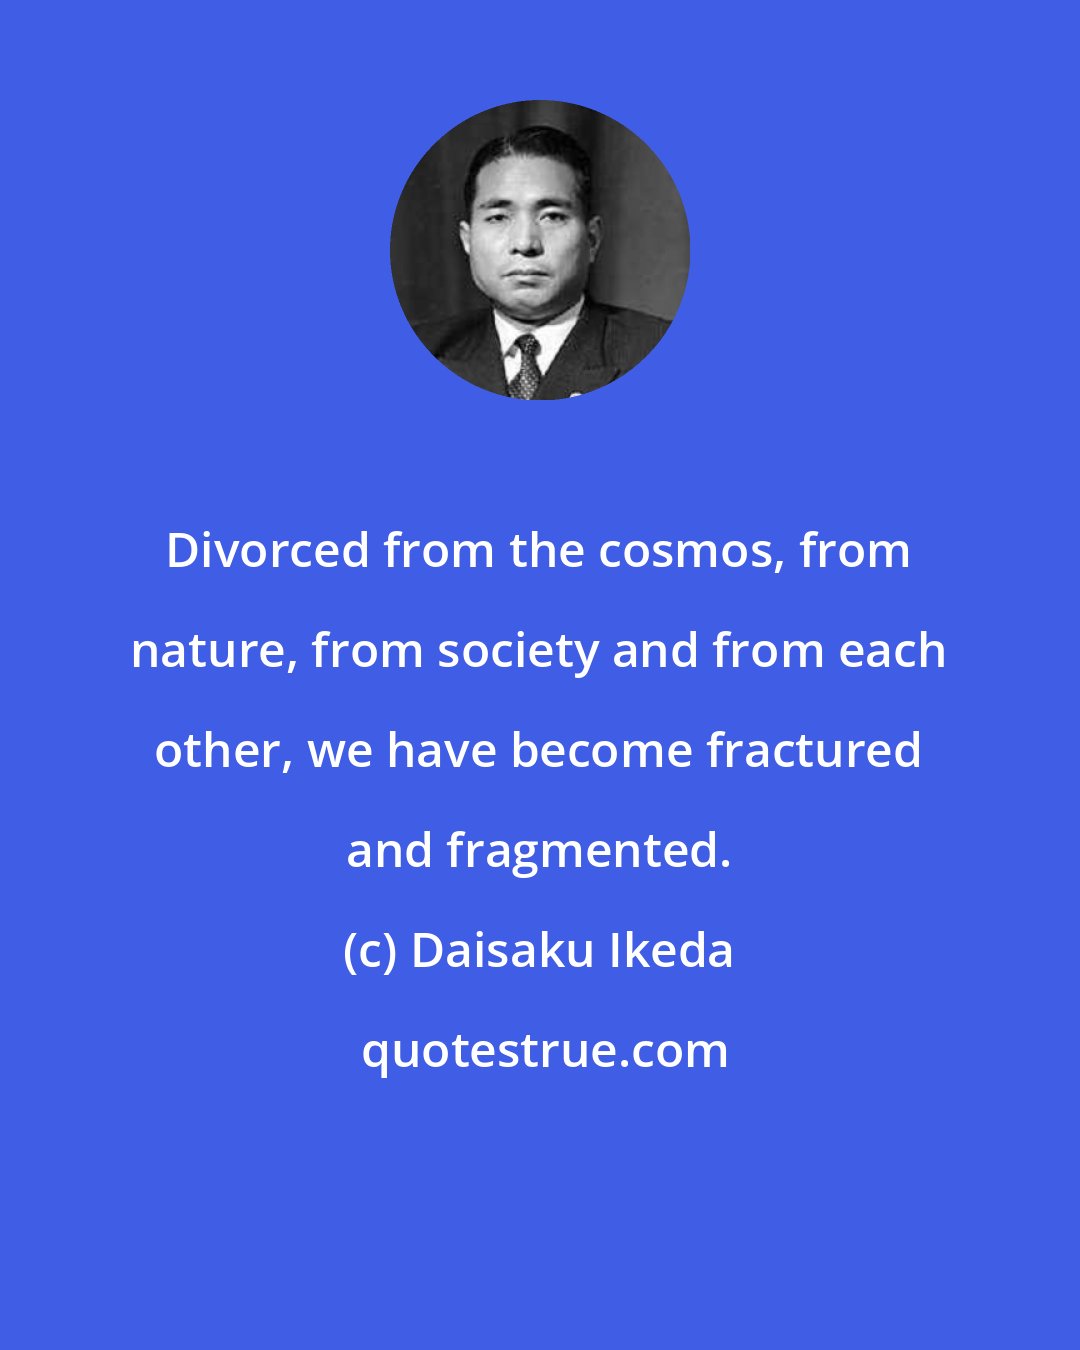 Daisaku Ikeda: Divorced from the cosmos, from nature, from society and from each other, we have become fractured and fragmented.